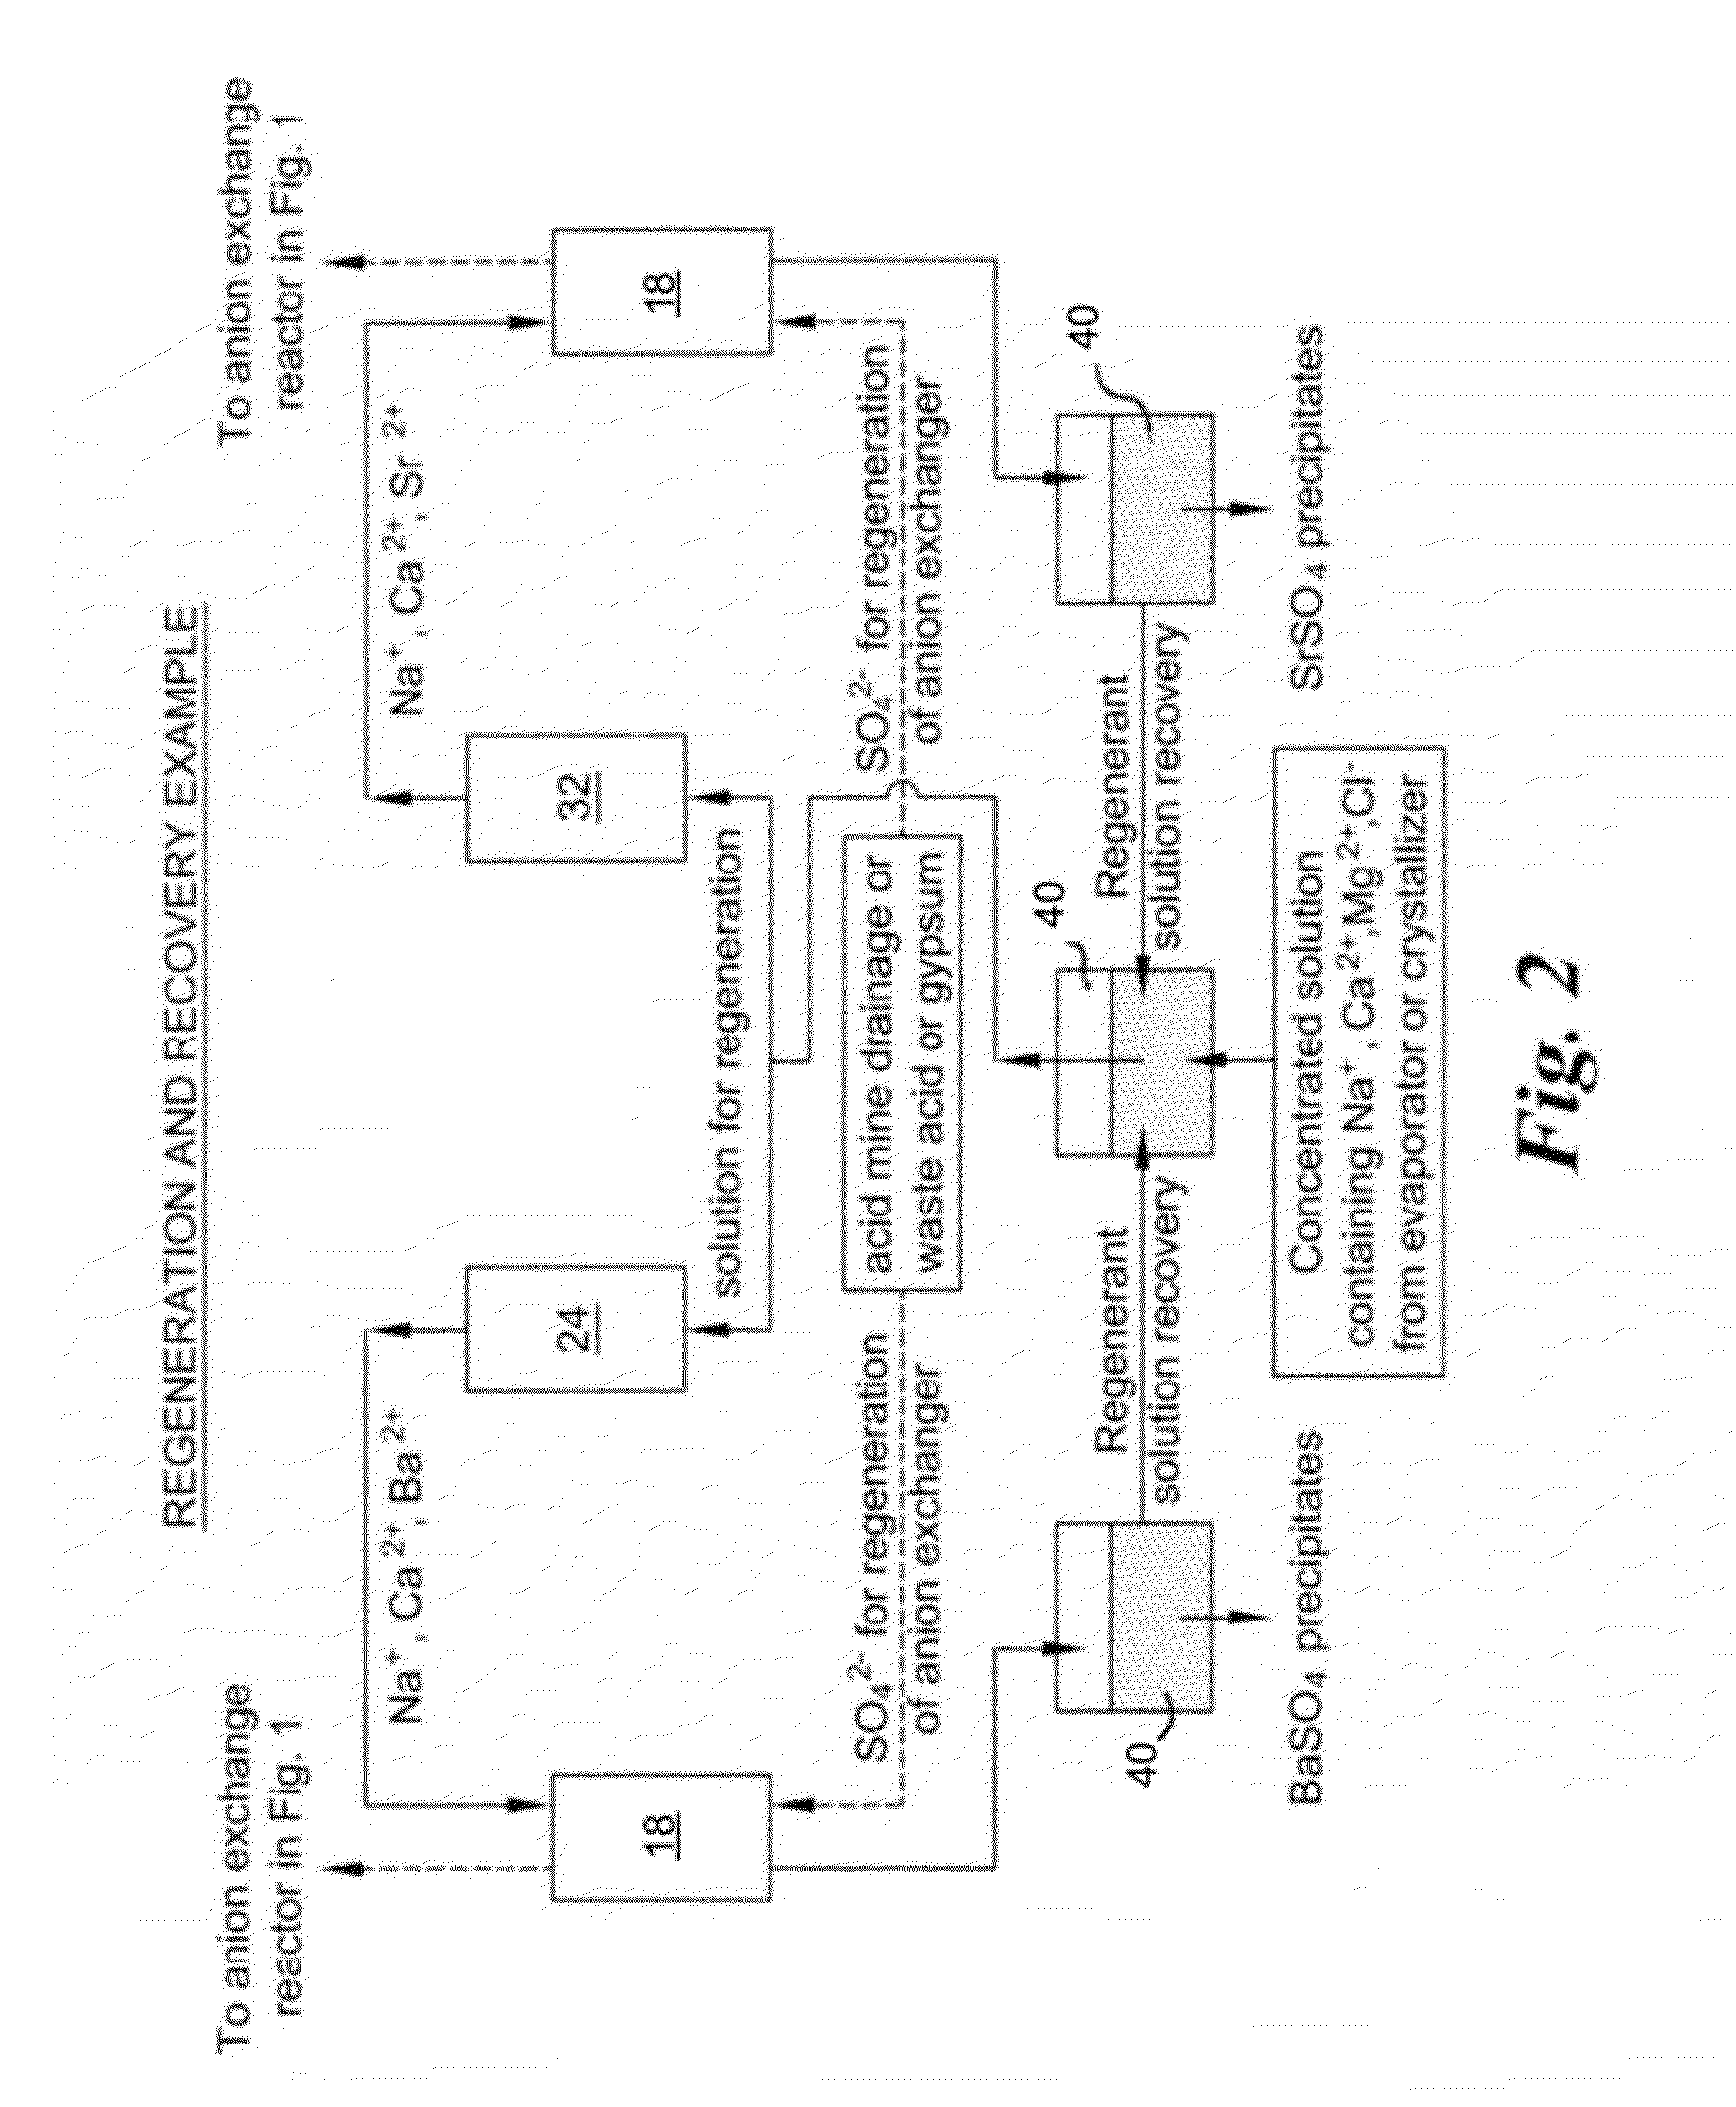 Method of treatment of produced water and recovery of important divalent cations